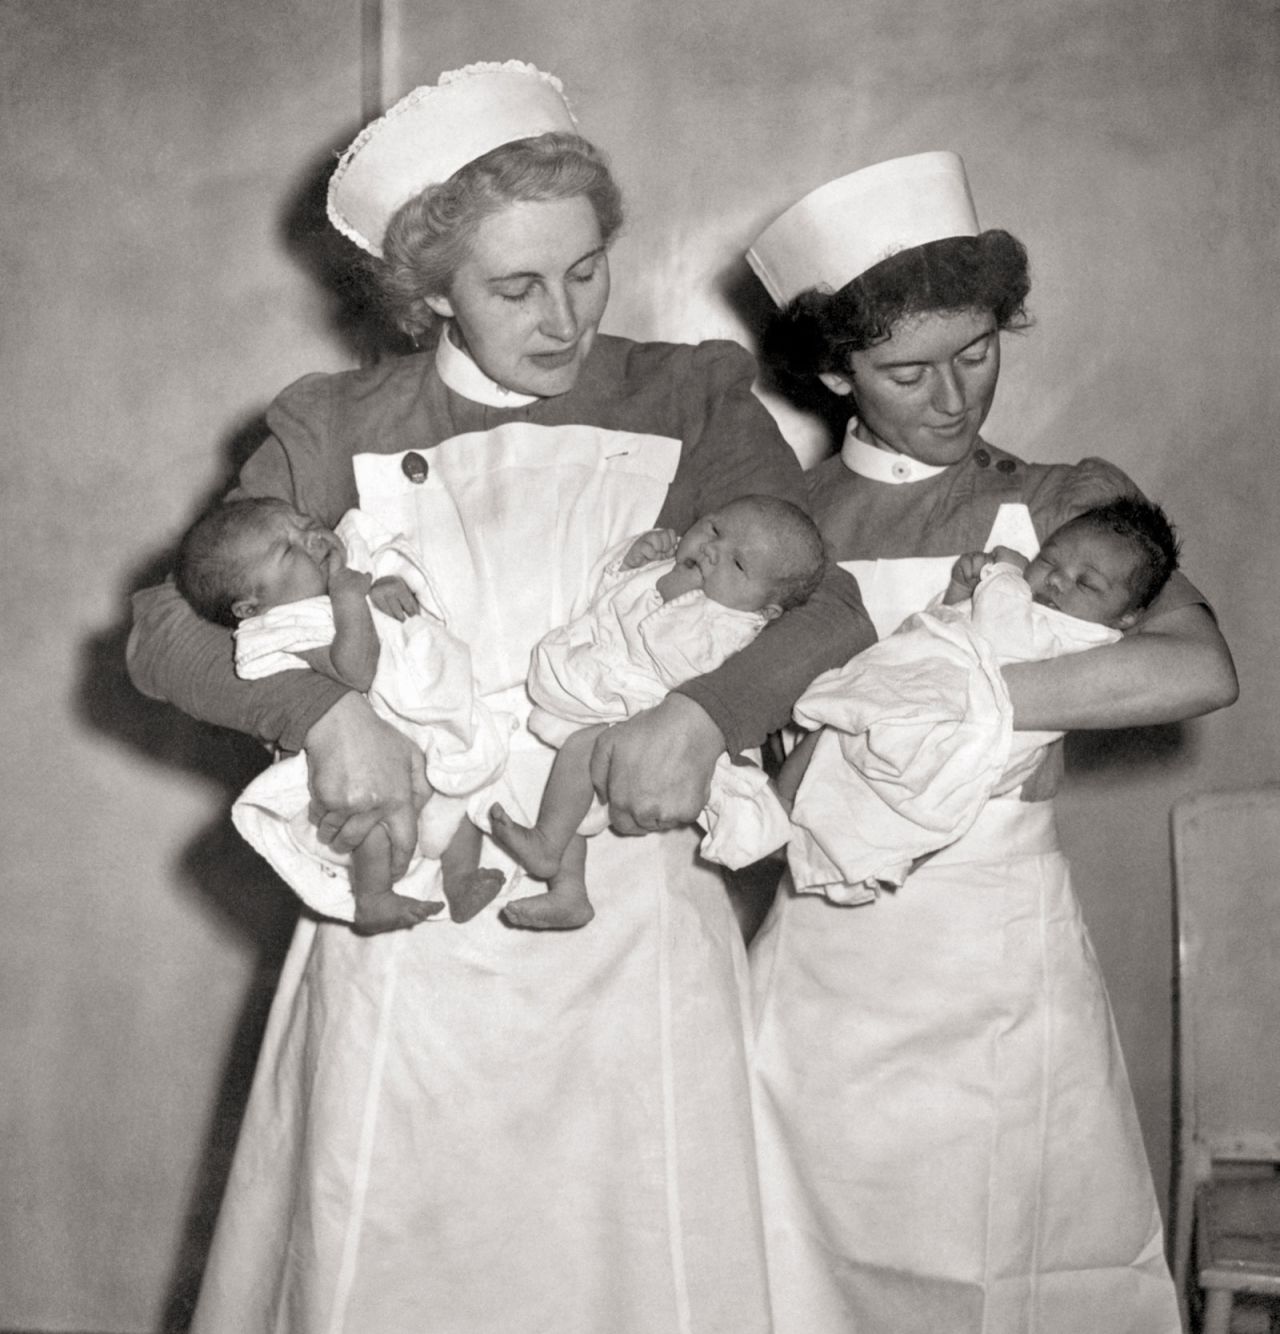 Nurses cradle the first babies to be born under the new National Health Service on 5th July 1948. Had they been born a day earlier, they would have cost their families one shilling and sixpence, according to new book 